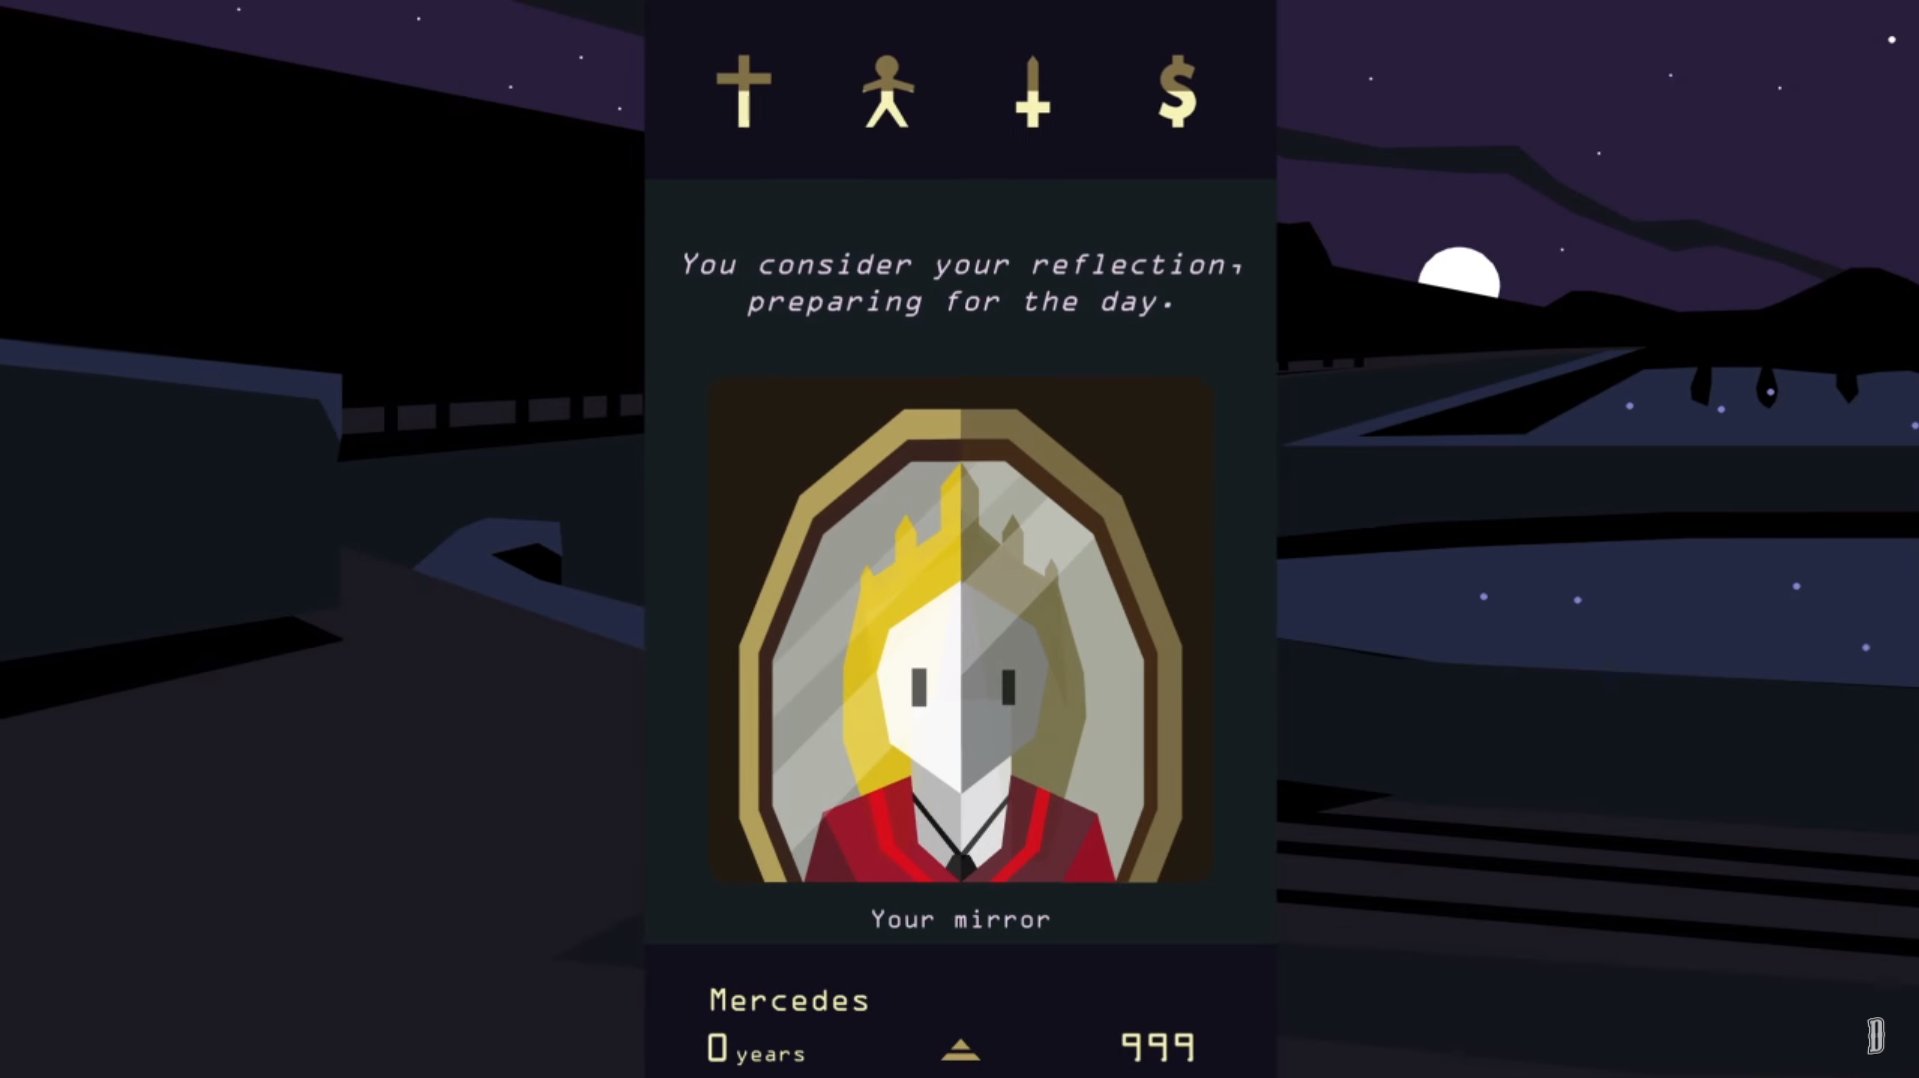 free download reigns her majesty items